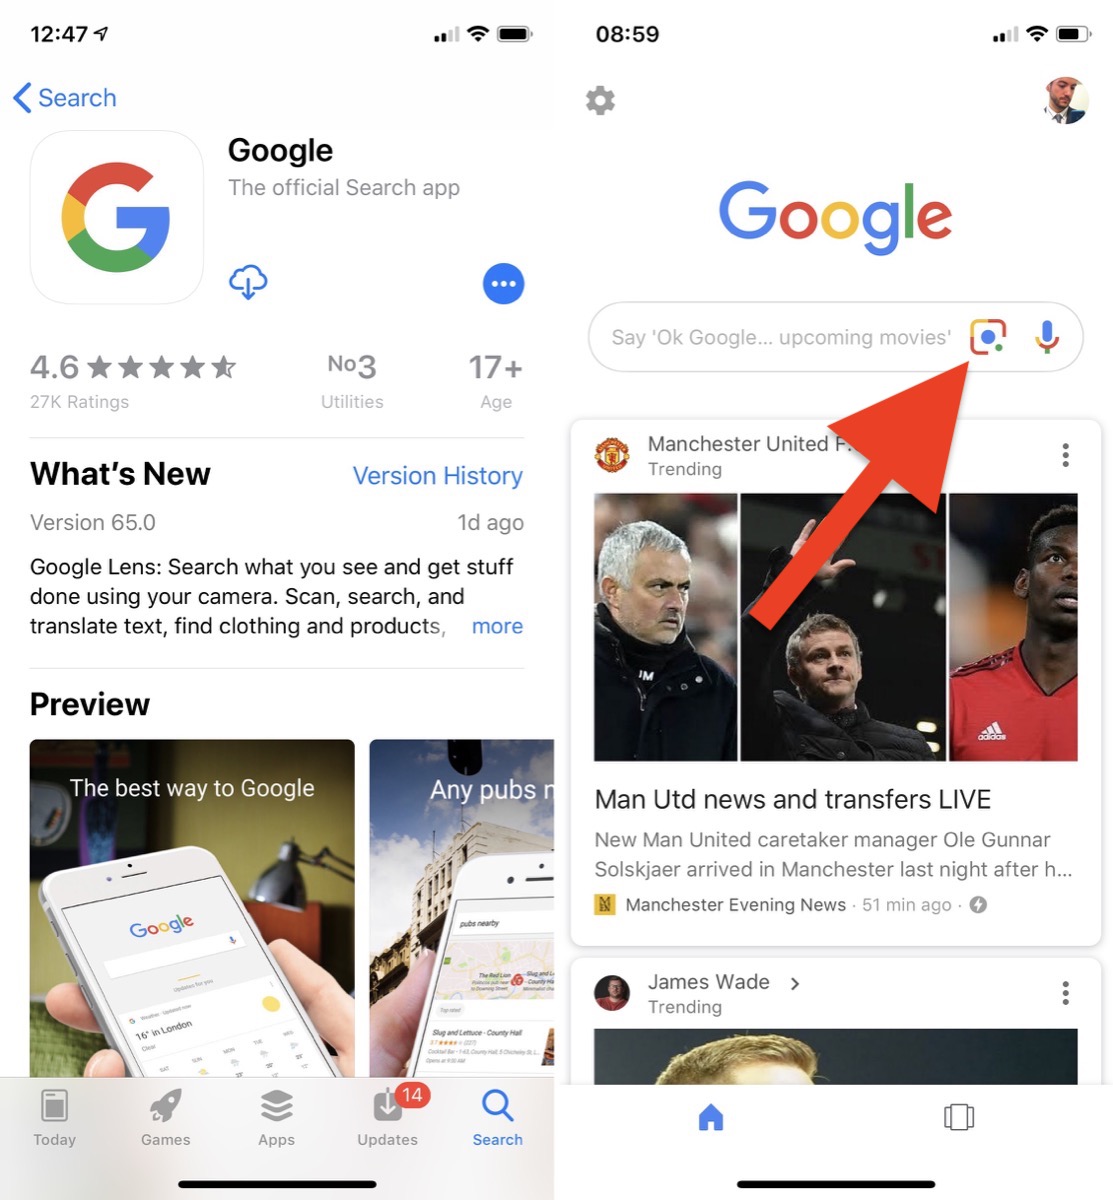 How do I use Google Lens in iPhone?